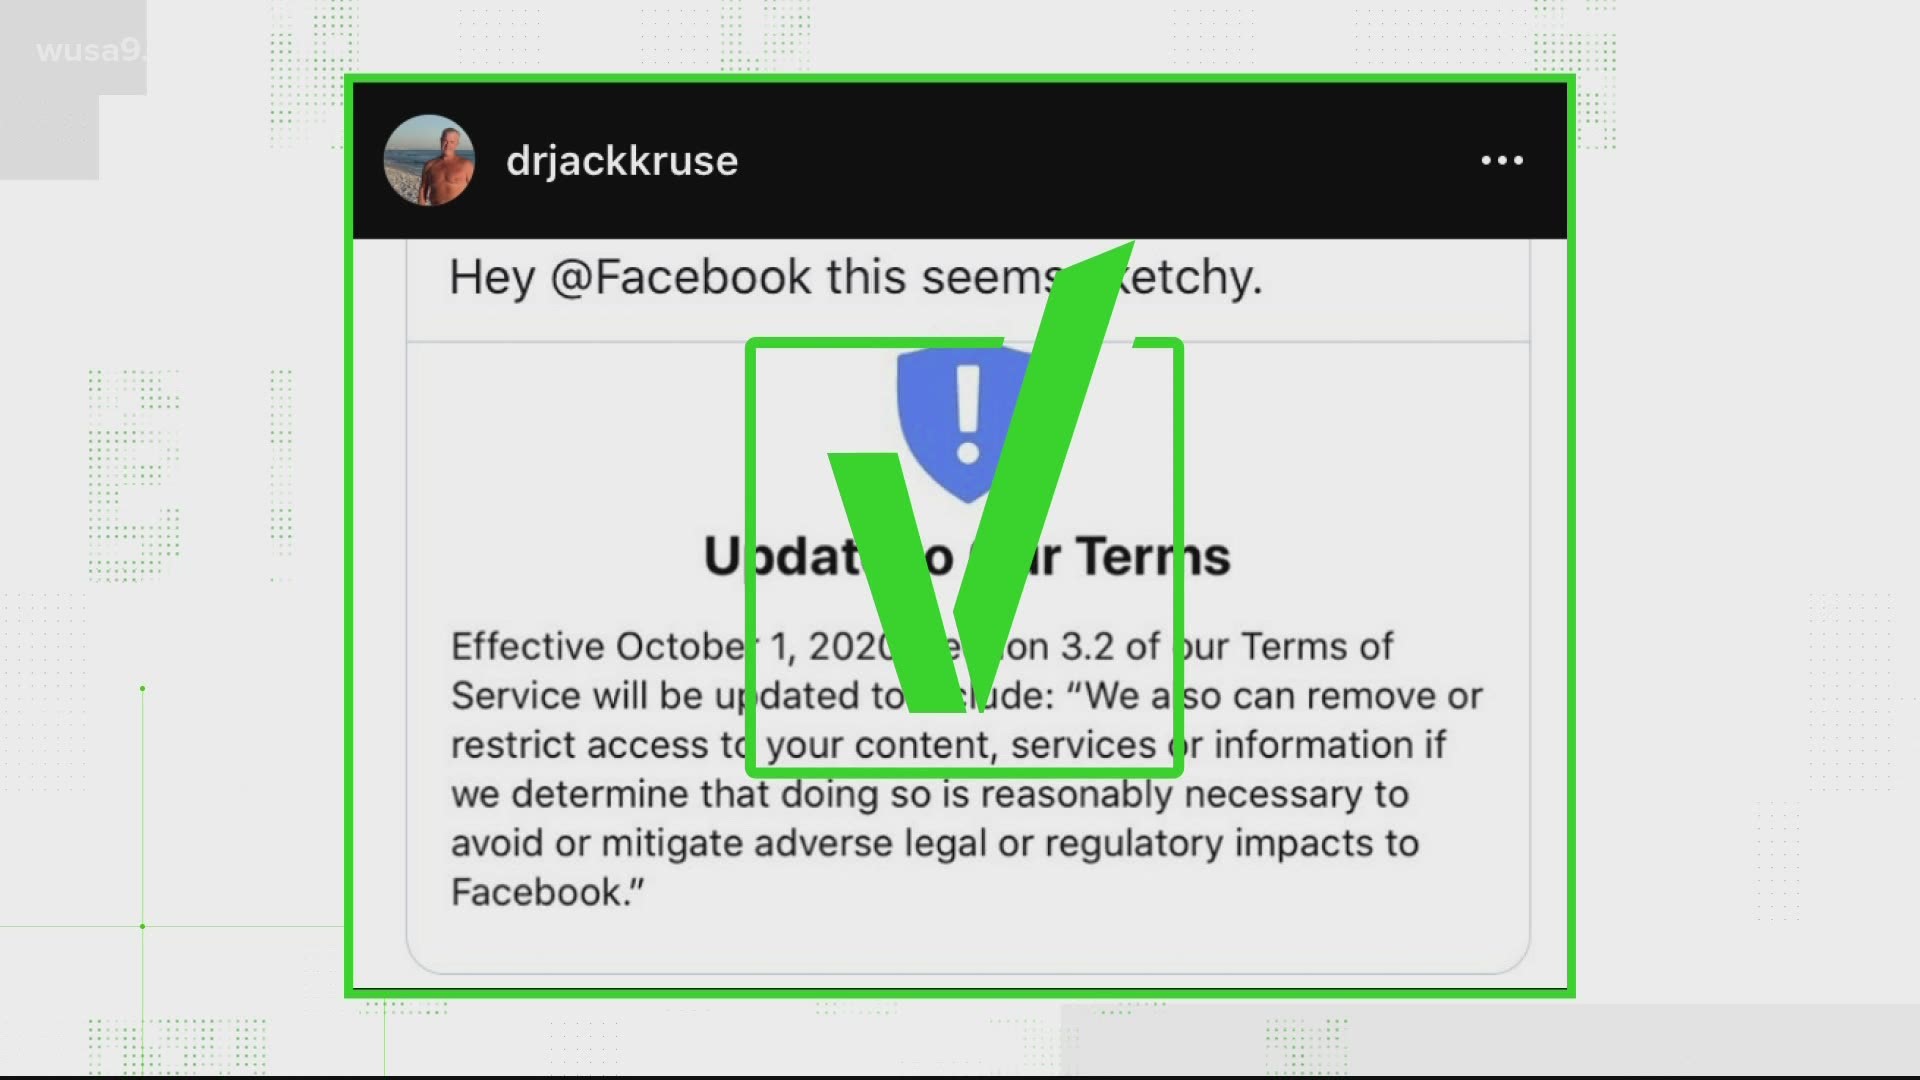 Facebook told us the update is in response to legislation proposed by the Australian government.